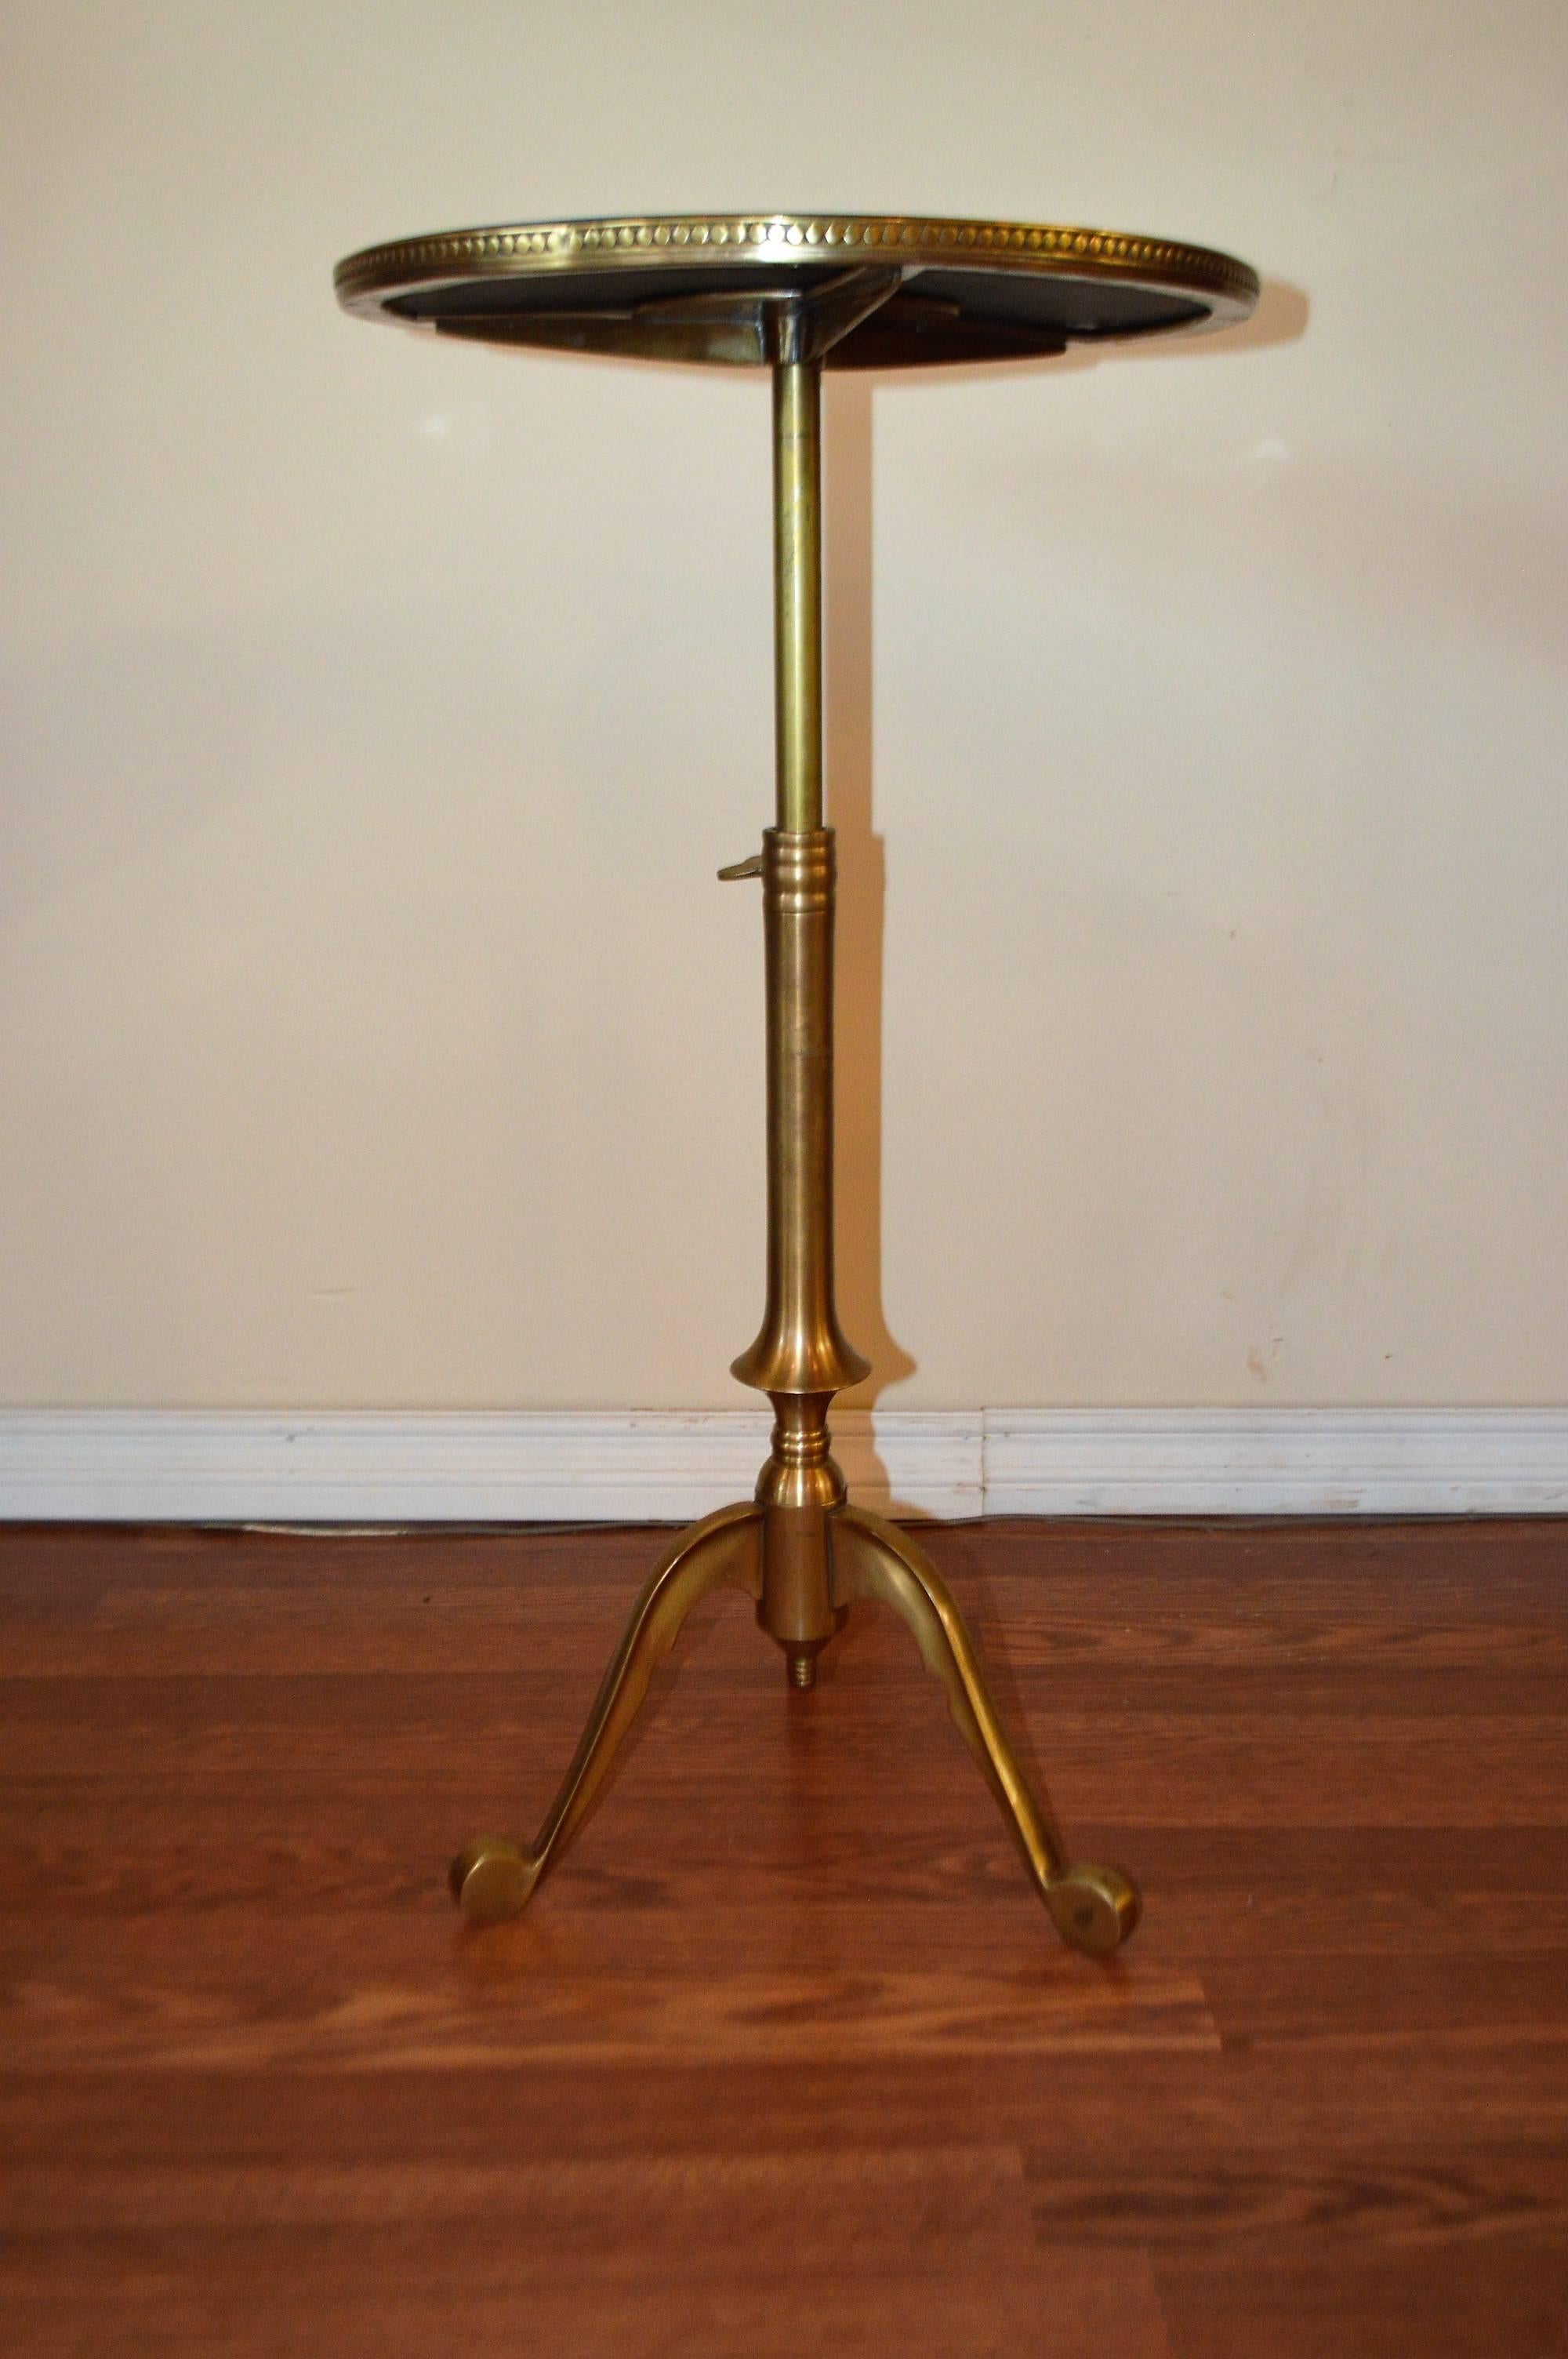 Decorative, fine quality, polished brass base side table, tripod style, nesting on three legs, it will extend to 31